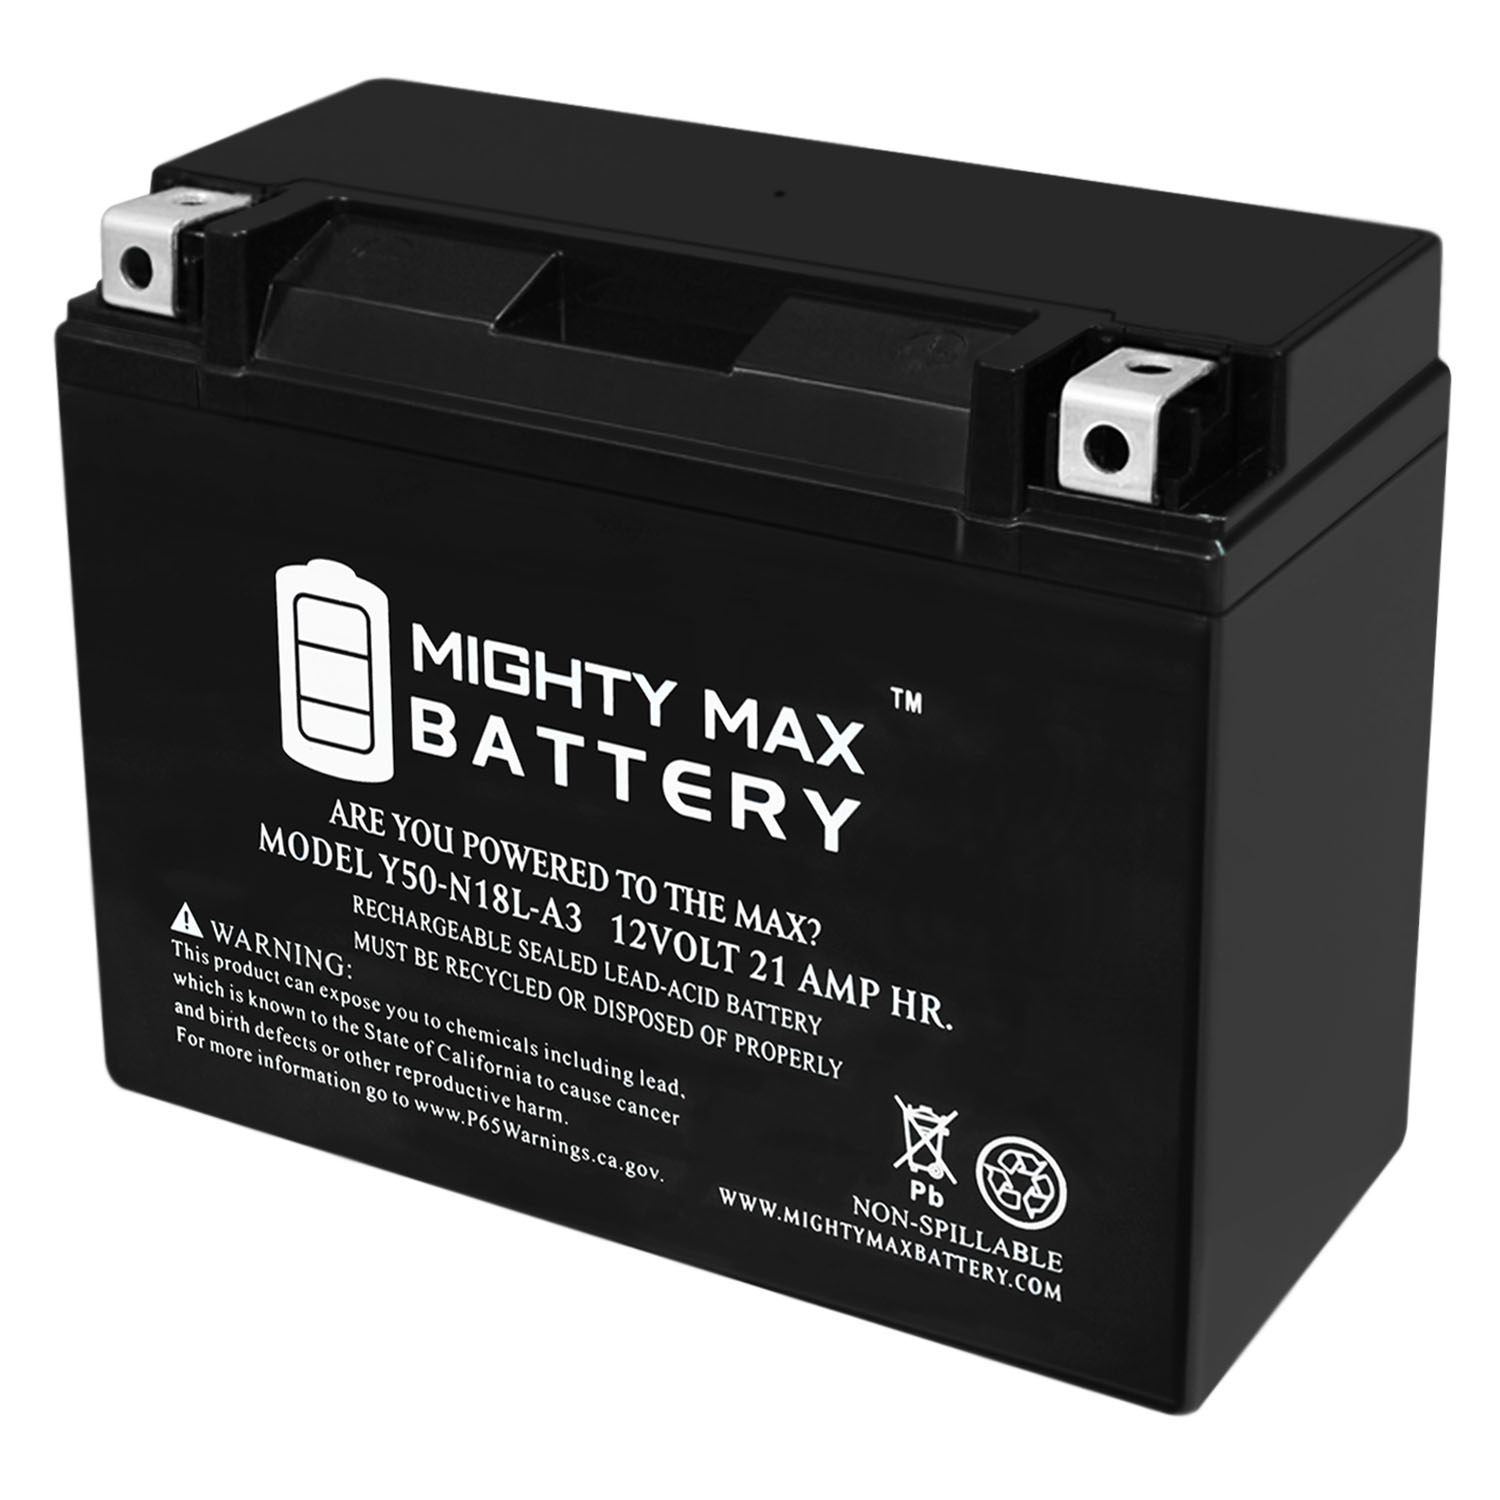 Y50-N18L-A3 Battery for HONDA GL1500 Gold Wing 1500CC 1988-2000